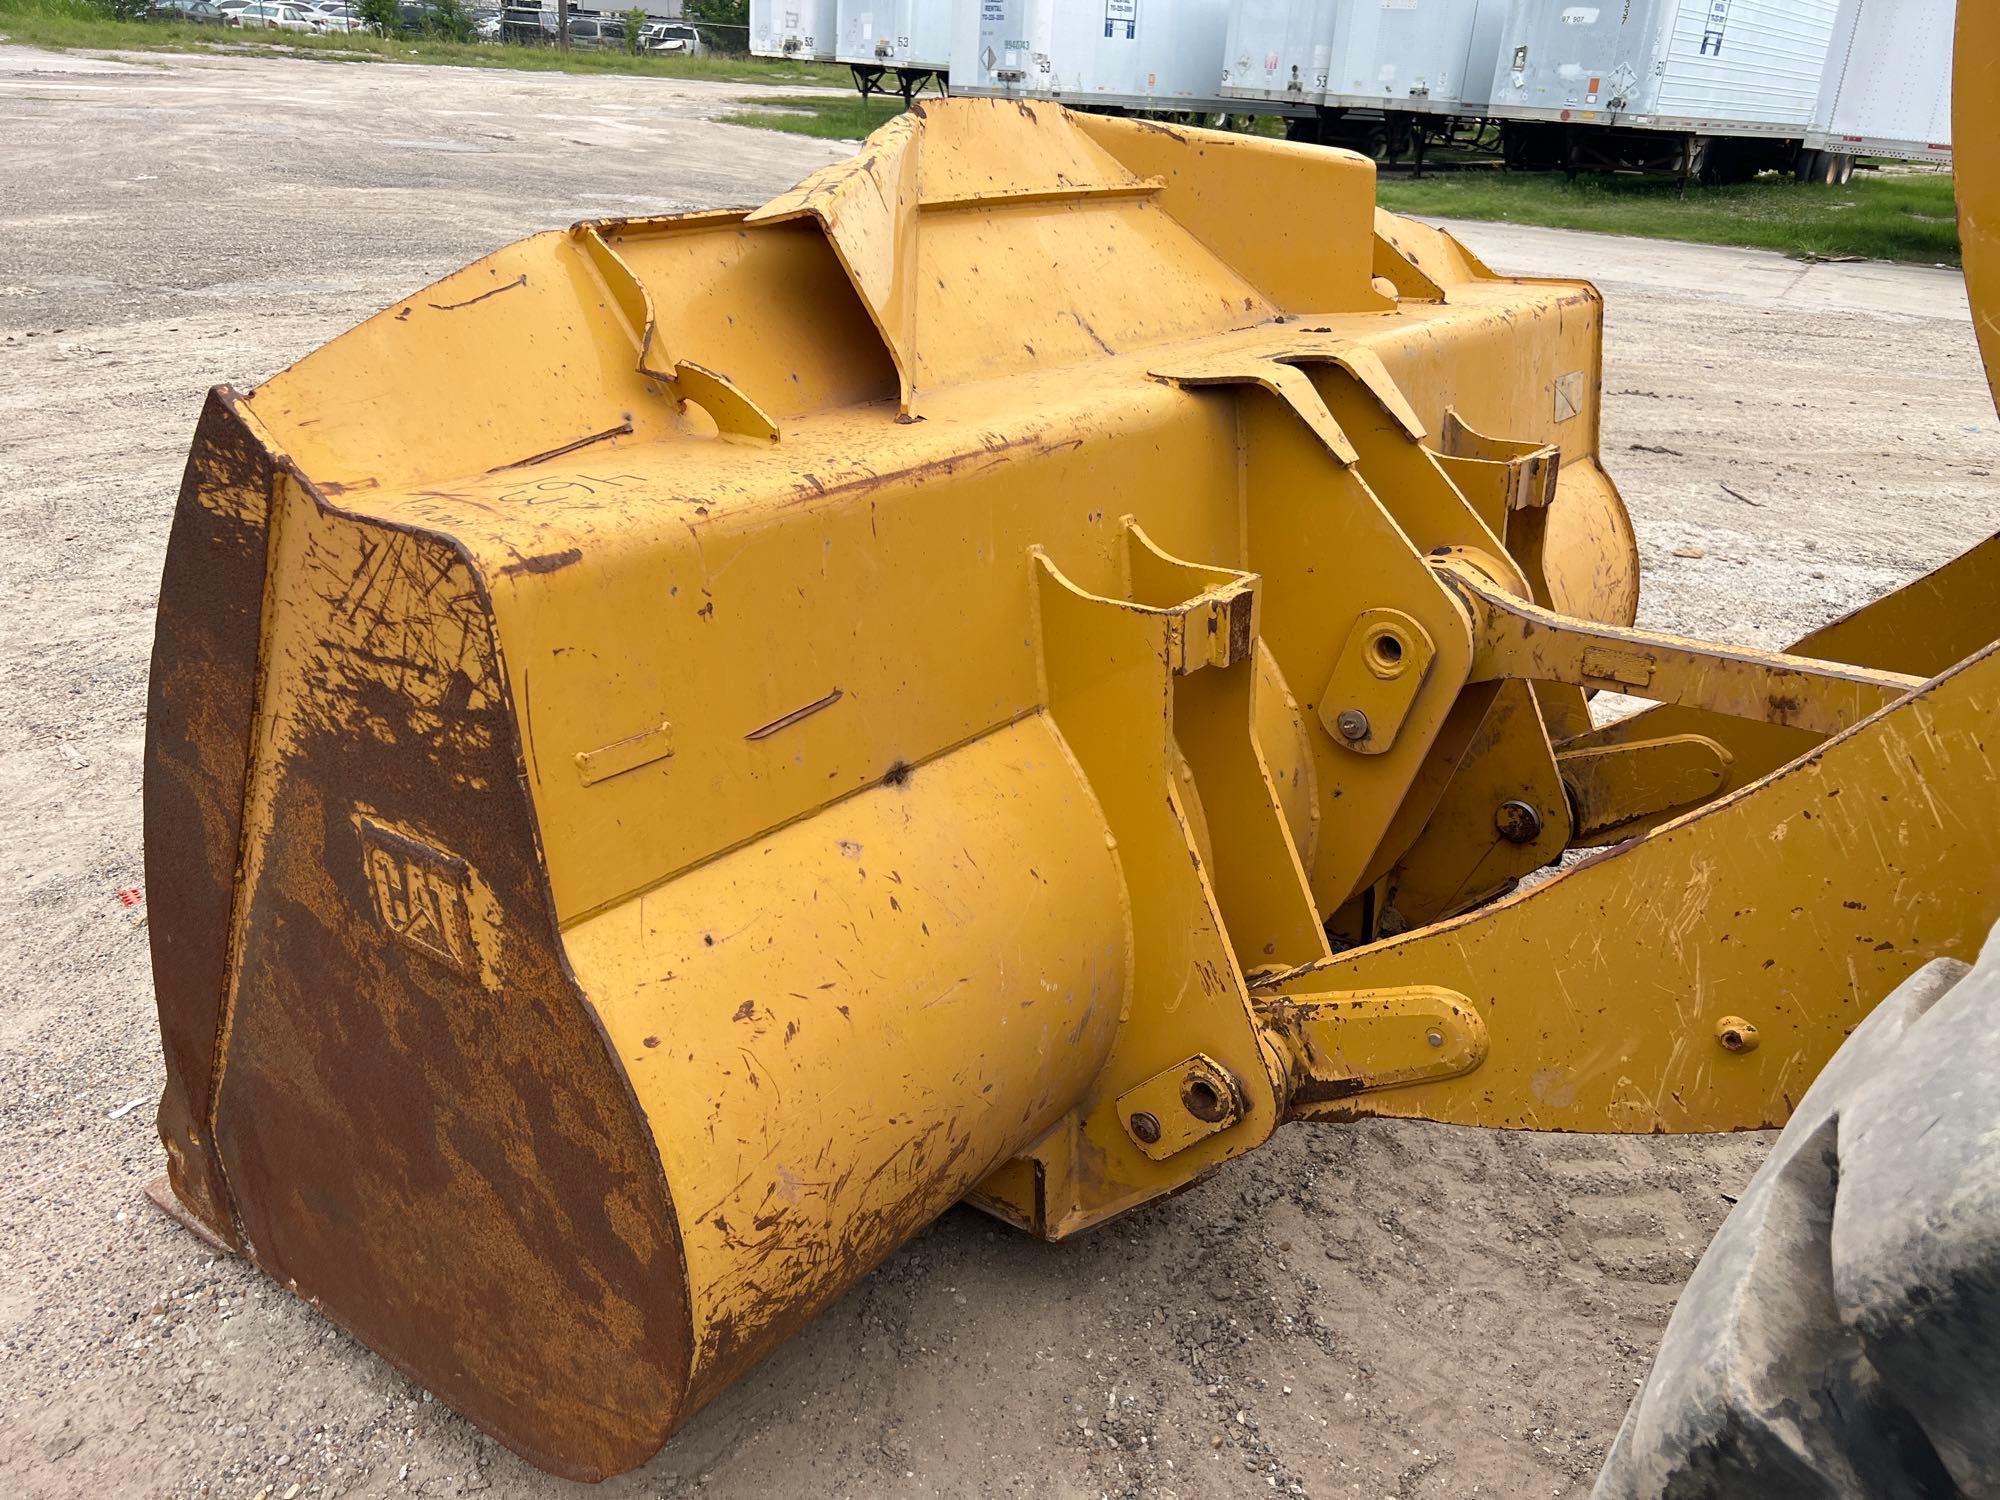 2017 CAT 930M RUBBER TIRED LOADER SN:KTG03101 powered by Cat diesel engine, equipped with EROPS,